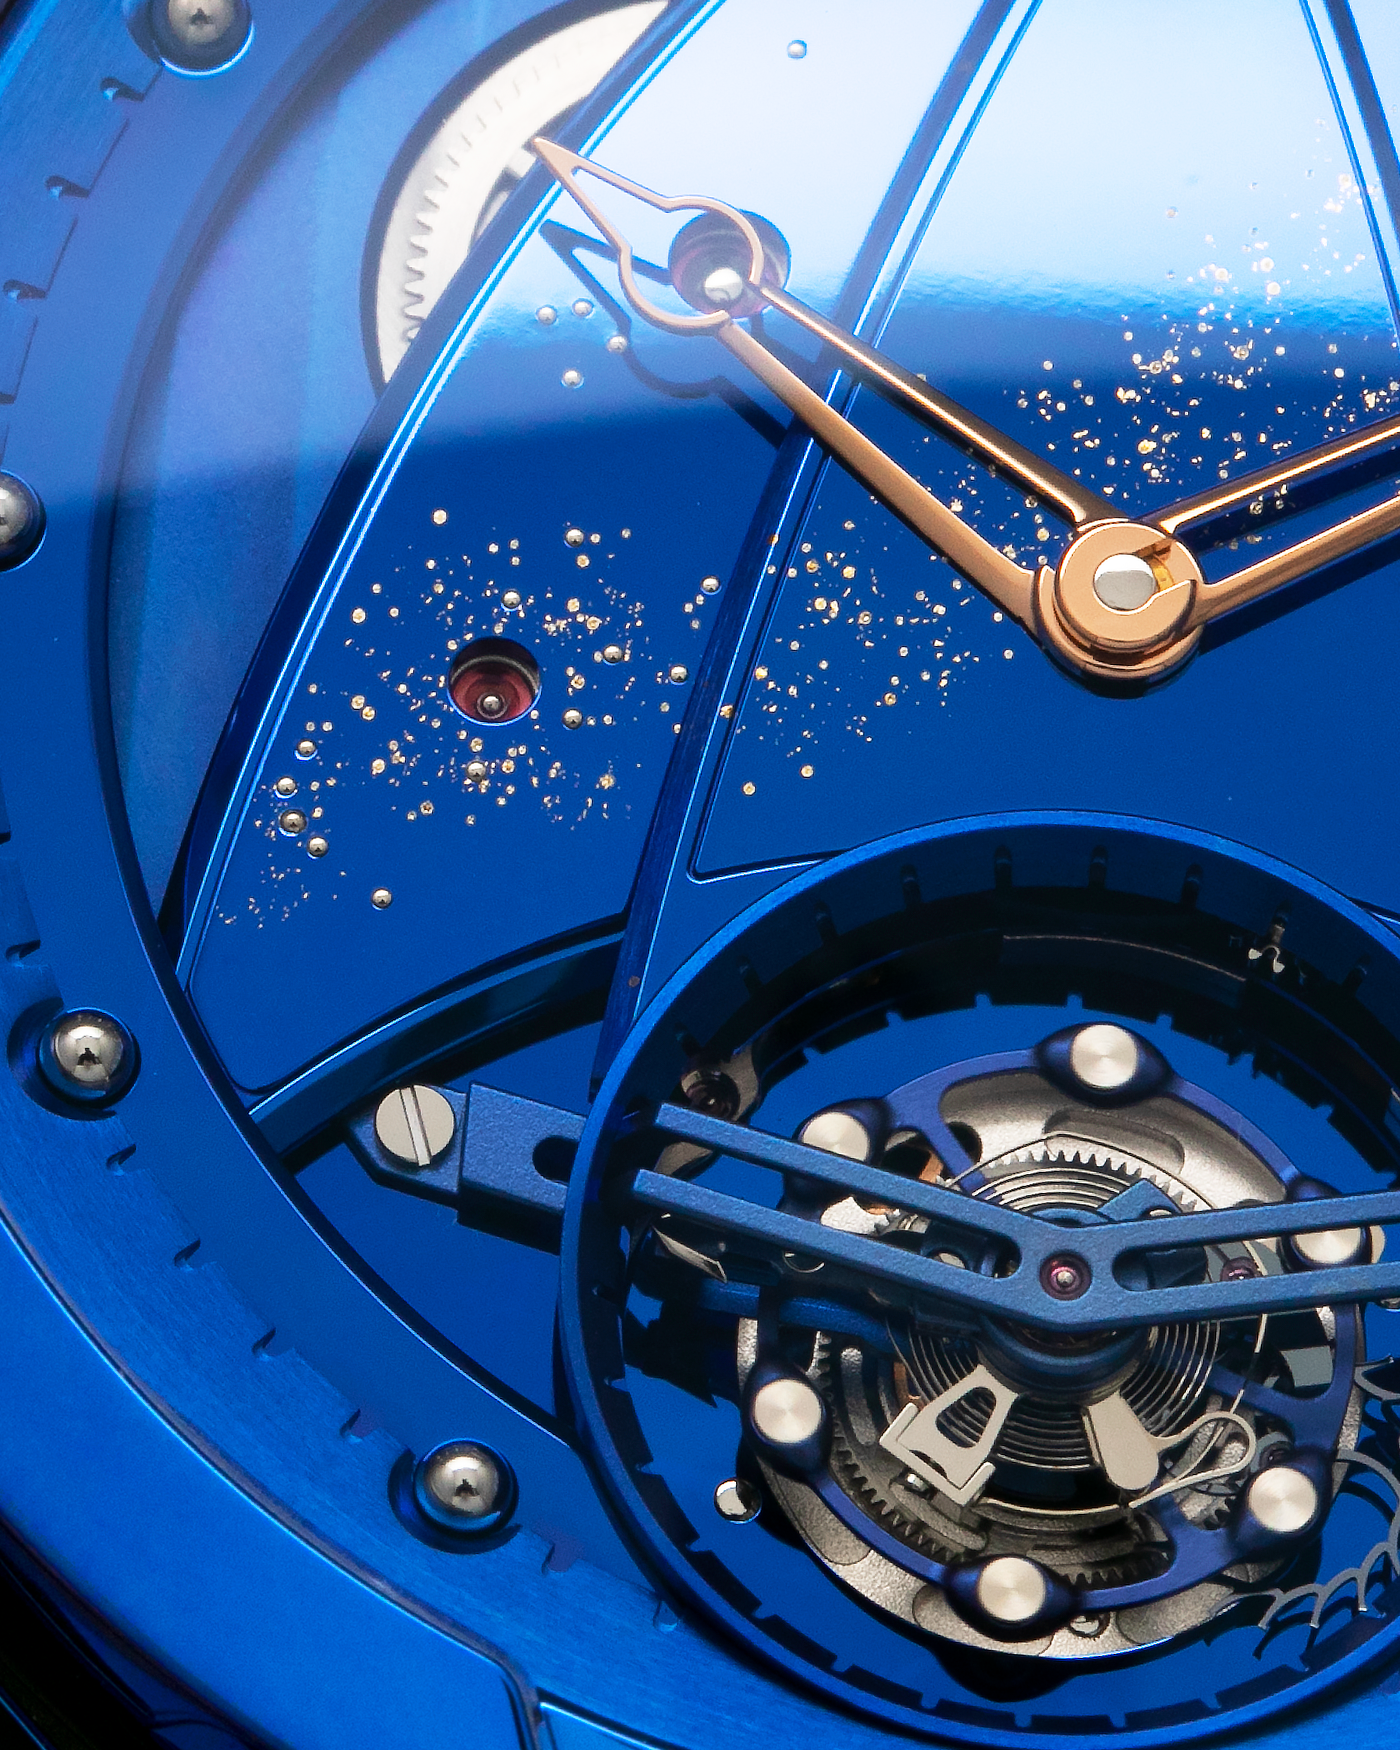 Brand: De Bethune Year: 2021 Model: Tourbillon Reference: DB28 ‘Kind of Blue’ Milky Way, Limited Edition of 5 Pieces Material: Blued Grade 5 Titanium Movement: Cal. DB2019, Manual-Winding Case Diameter: 43mm Strap: De Bethune Dark Blue Alligator Leather Strap with Signed Blued Titanium Tang Buckle, with additional De Bethune Dark Blue Tungsten Lizard Leather Strap